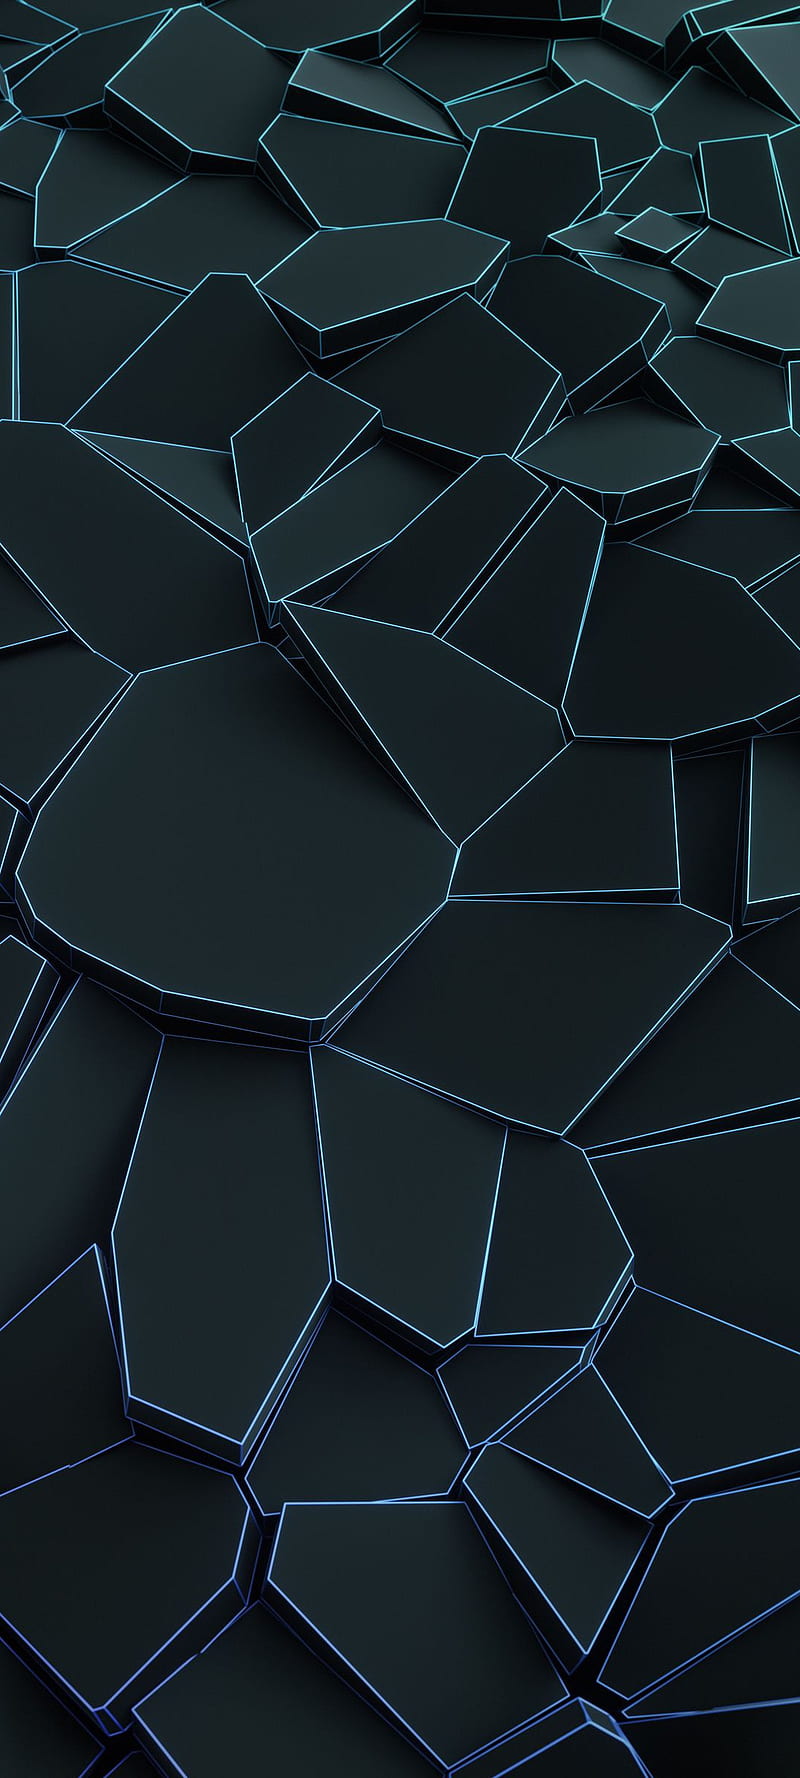 Pebels Abstract Android Black Blue Gris Honeycomb Hd Mobile Wallpaper Peakpx